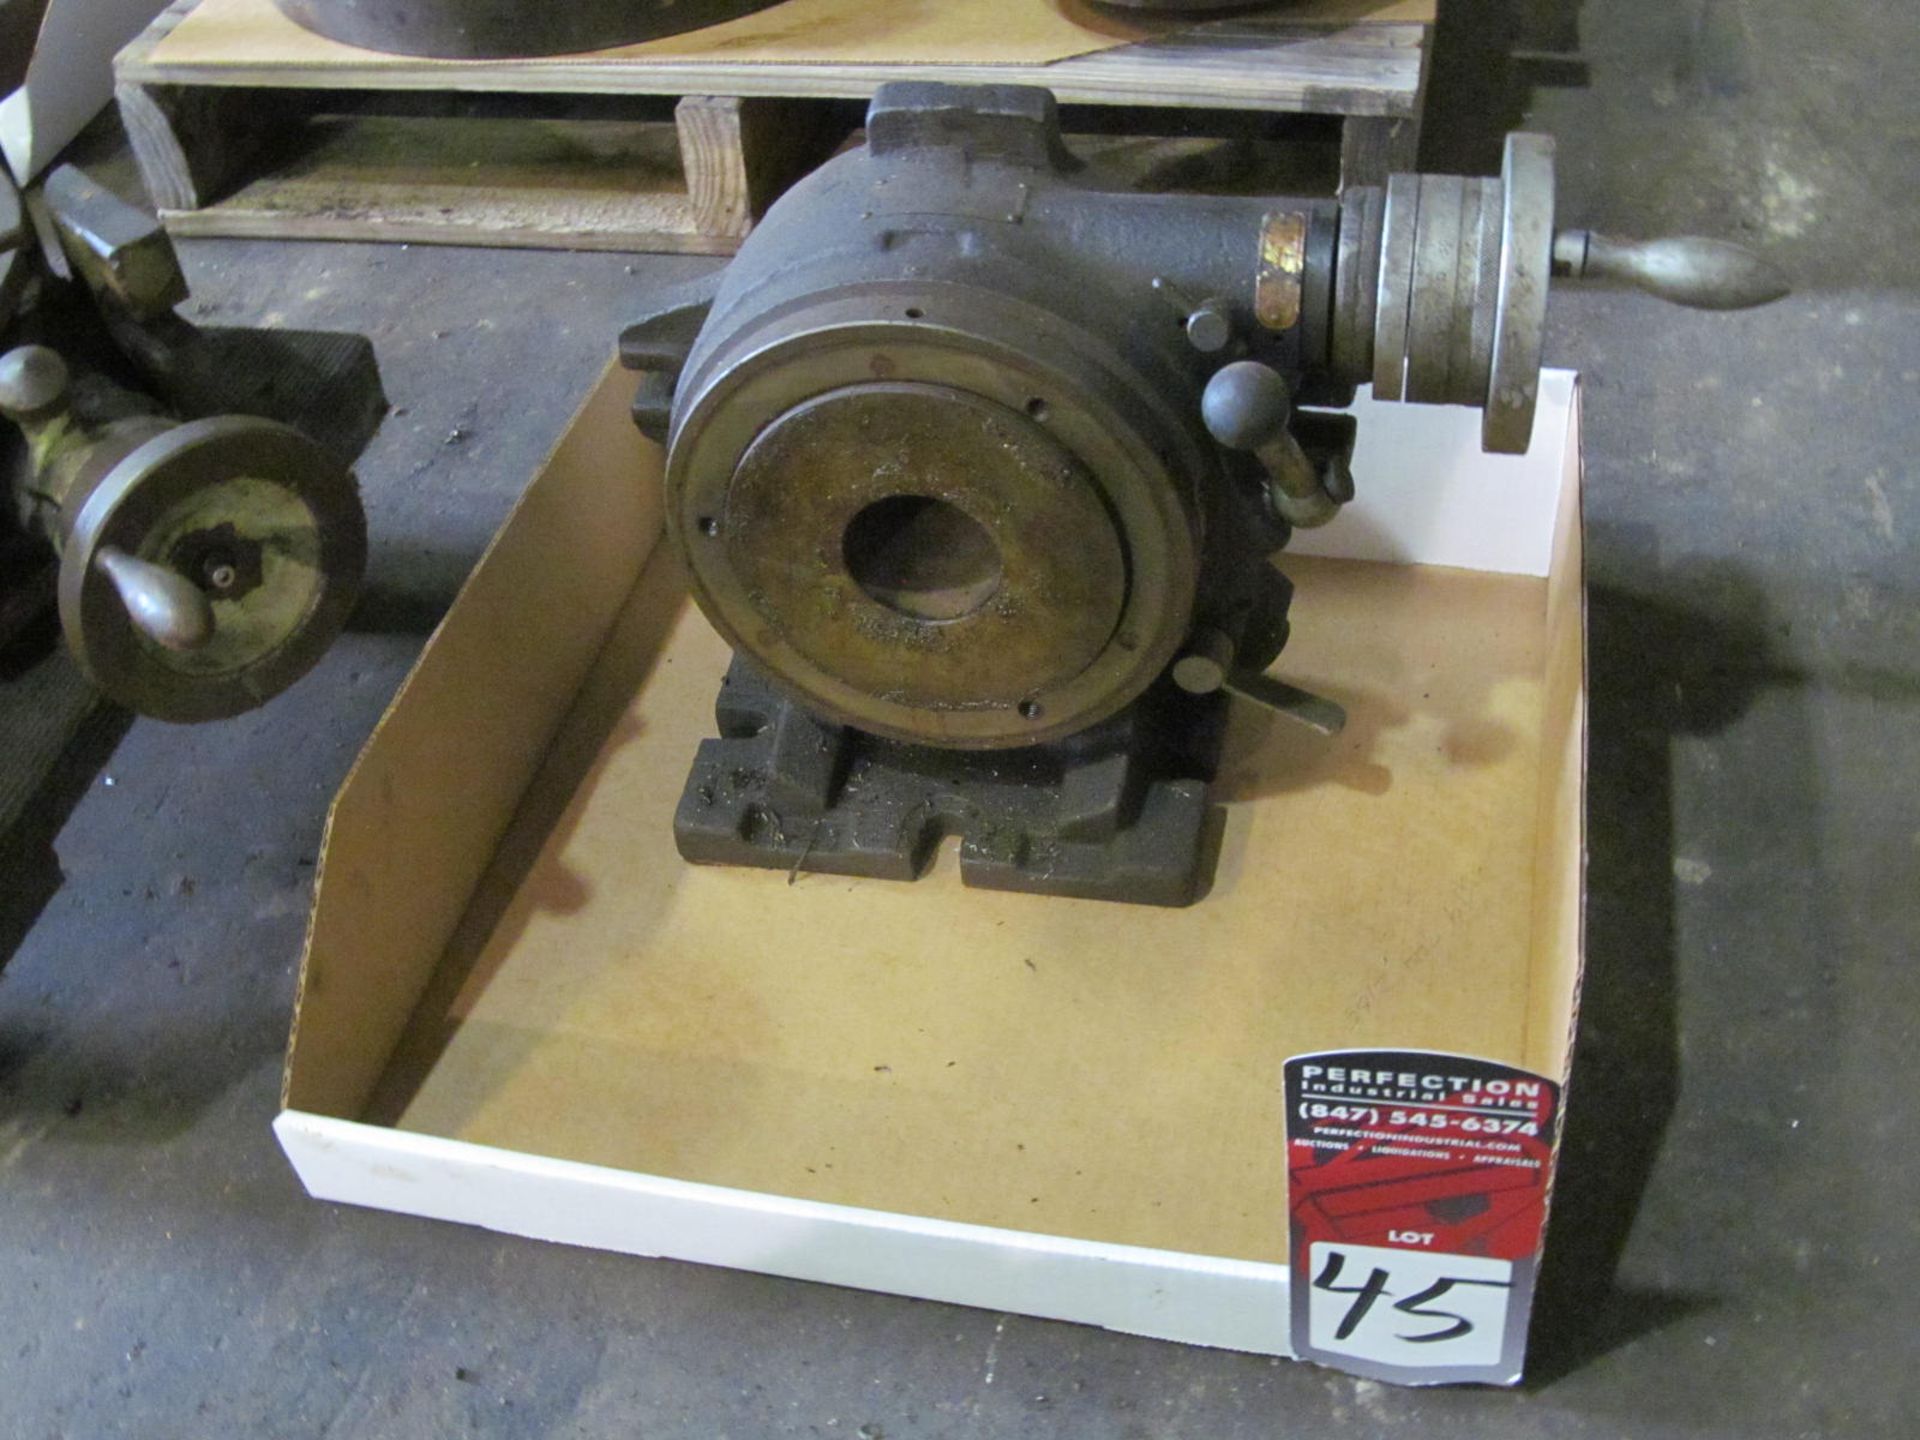 8" Rotary Table